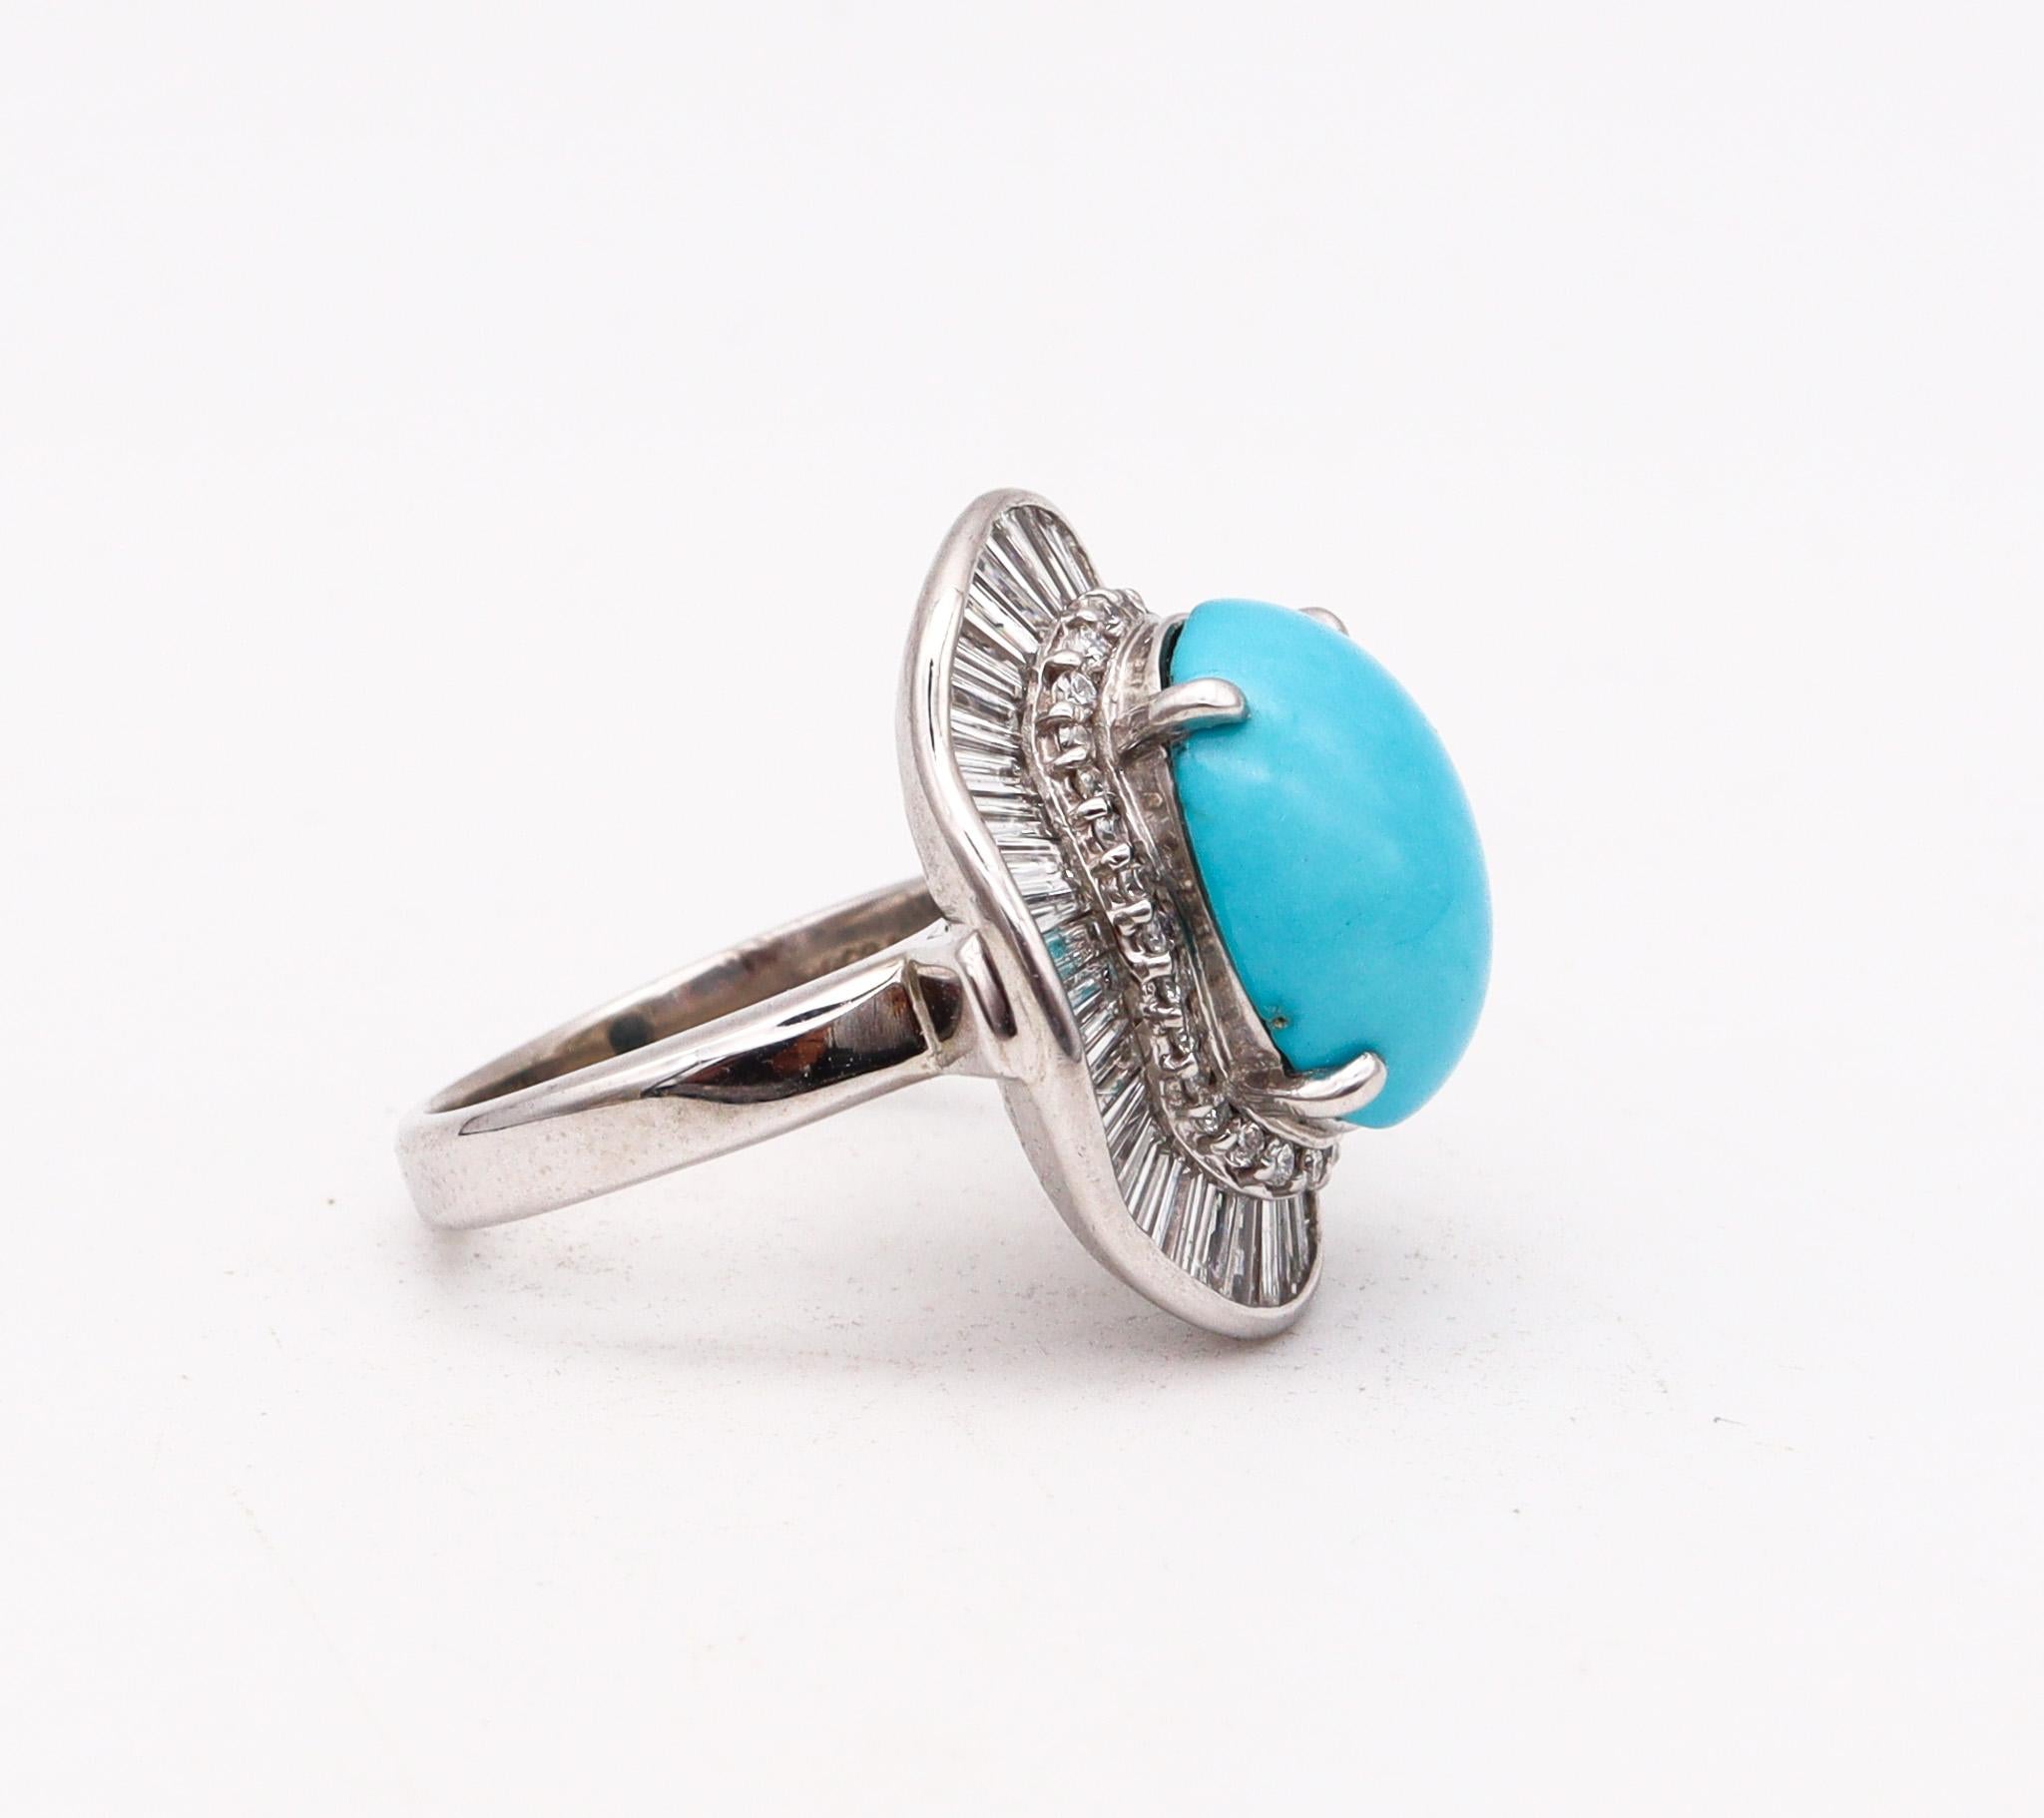 Baguette Cut Ballerina Cocktail Ring In Solid Platinum With 10.02 Ctw Diamonds And Turquoise For Sale